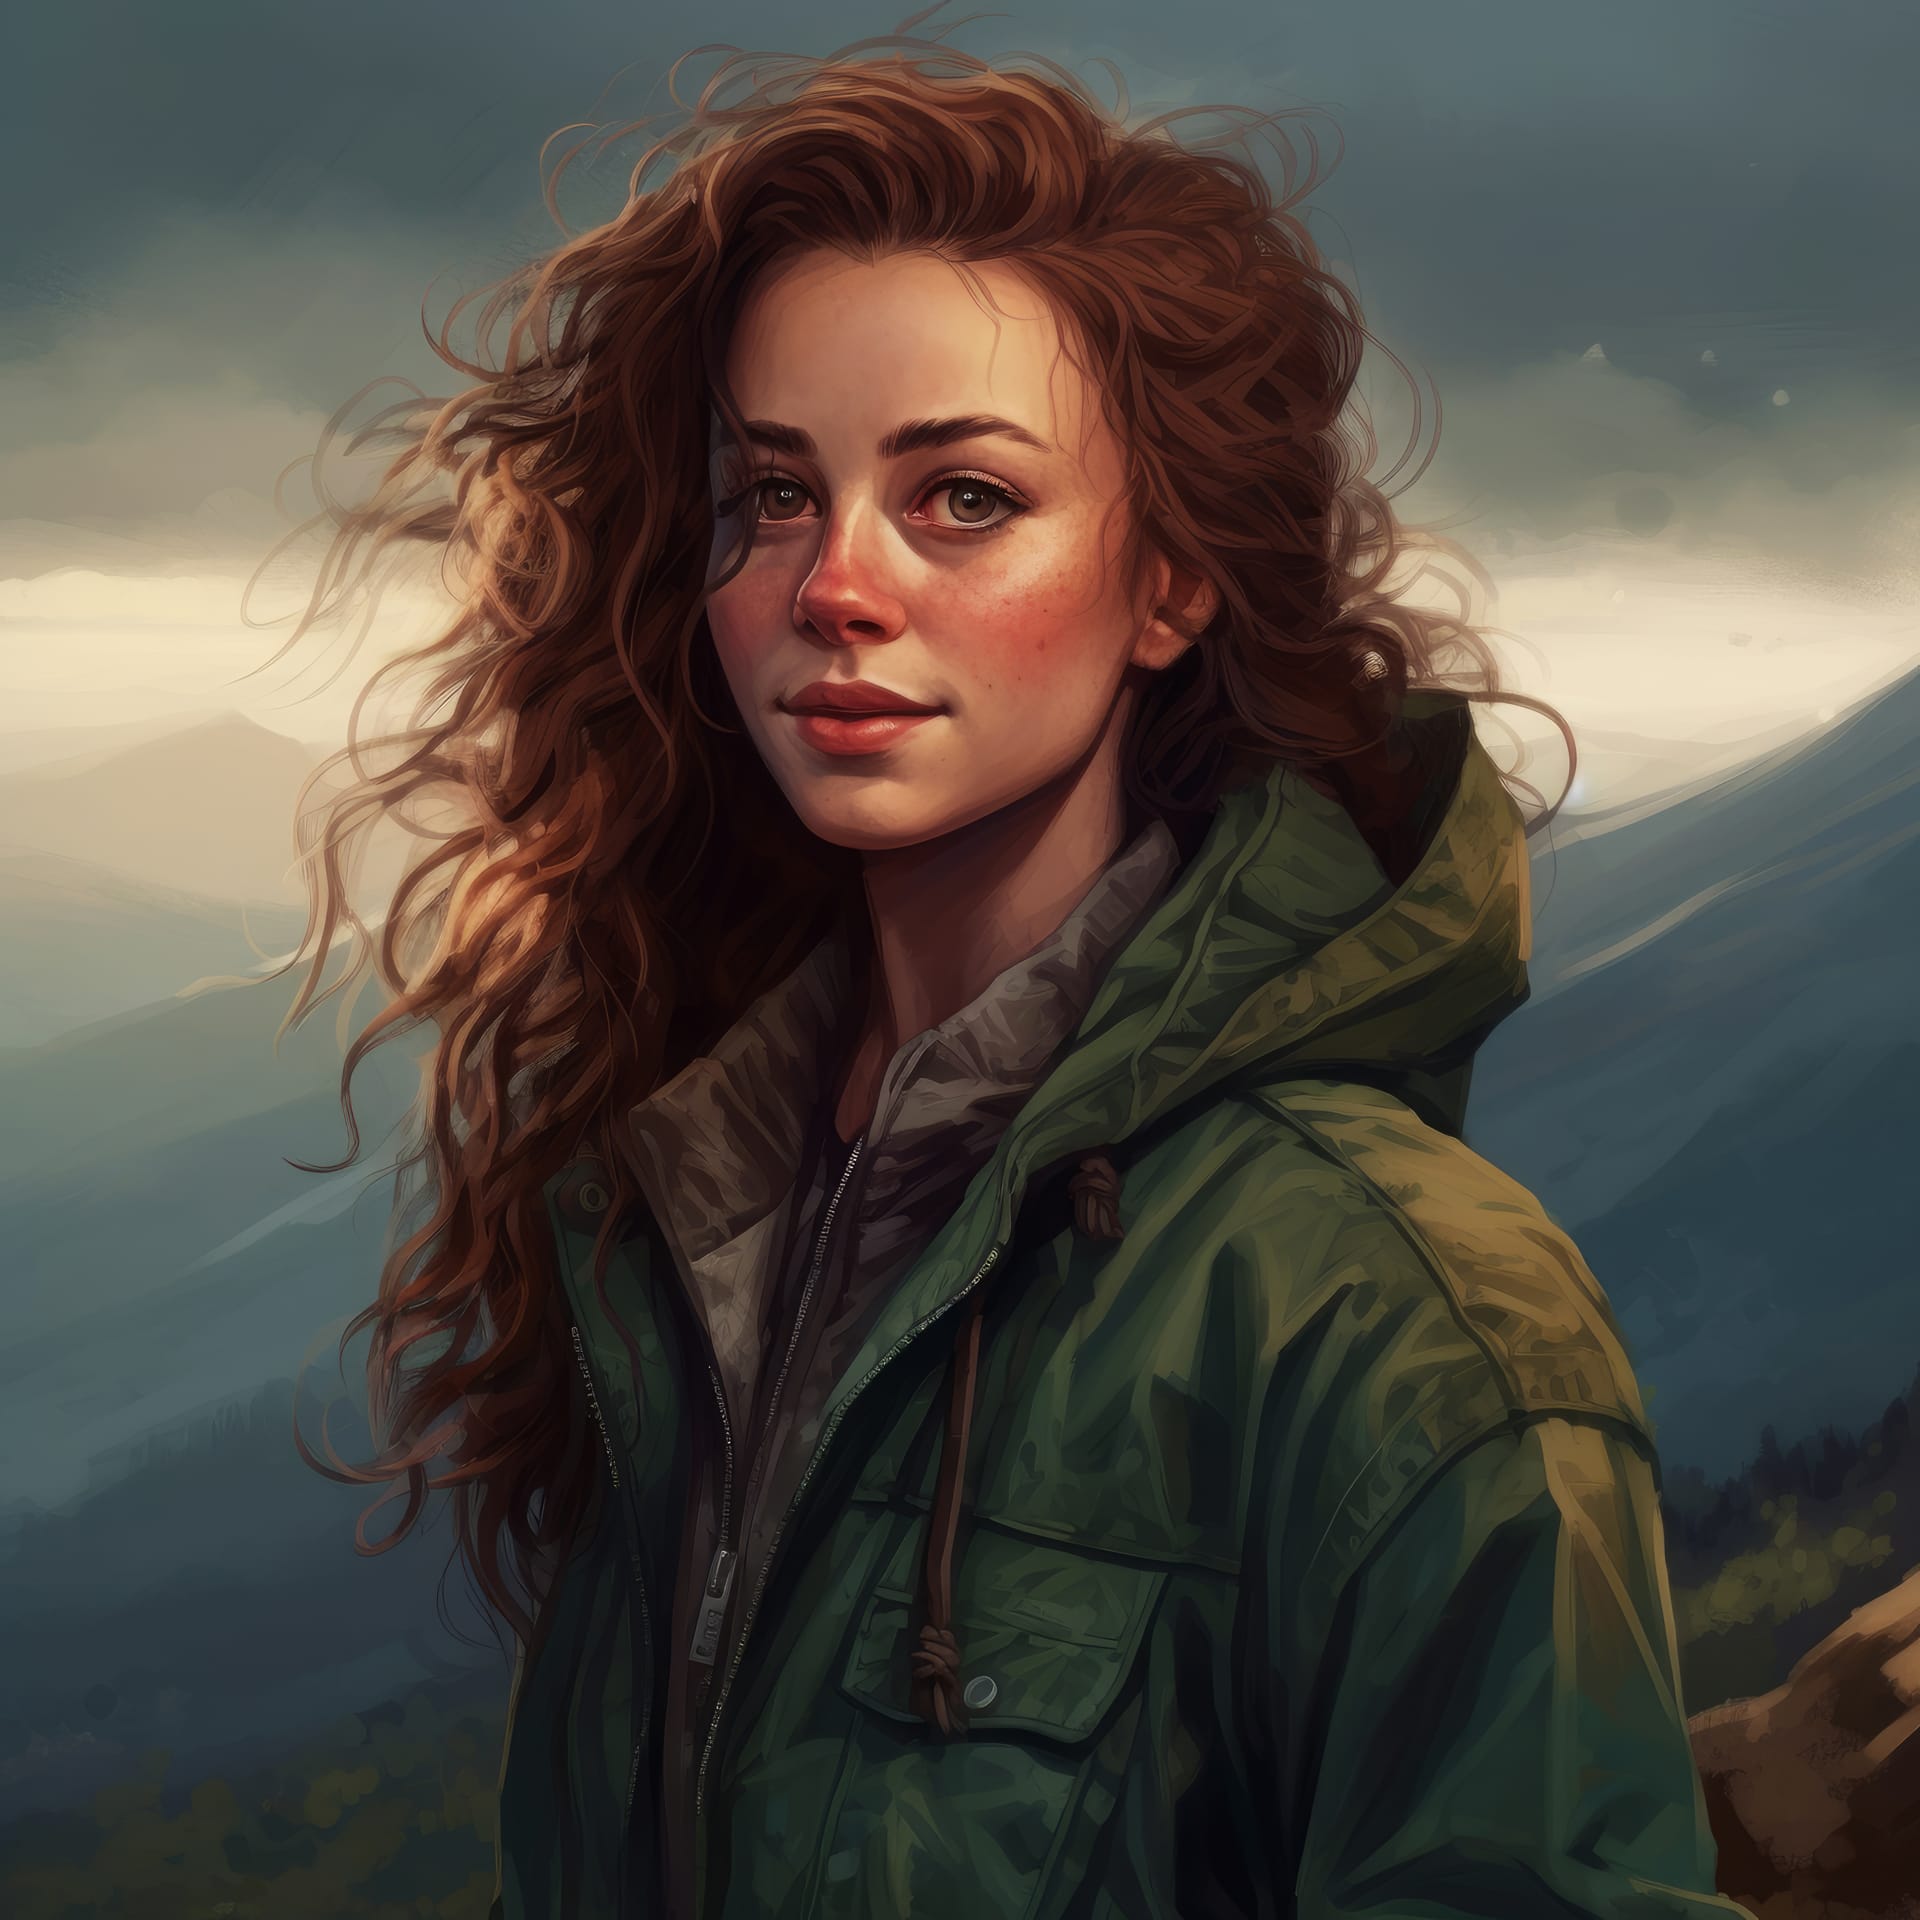 Painting woman with red hair green jacket